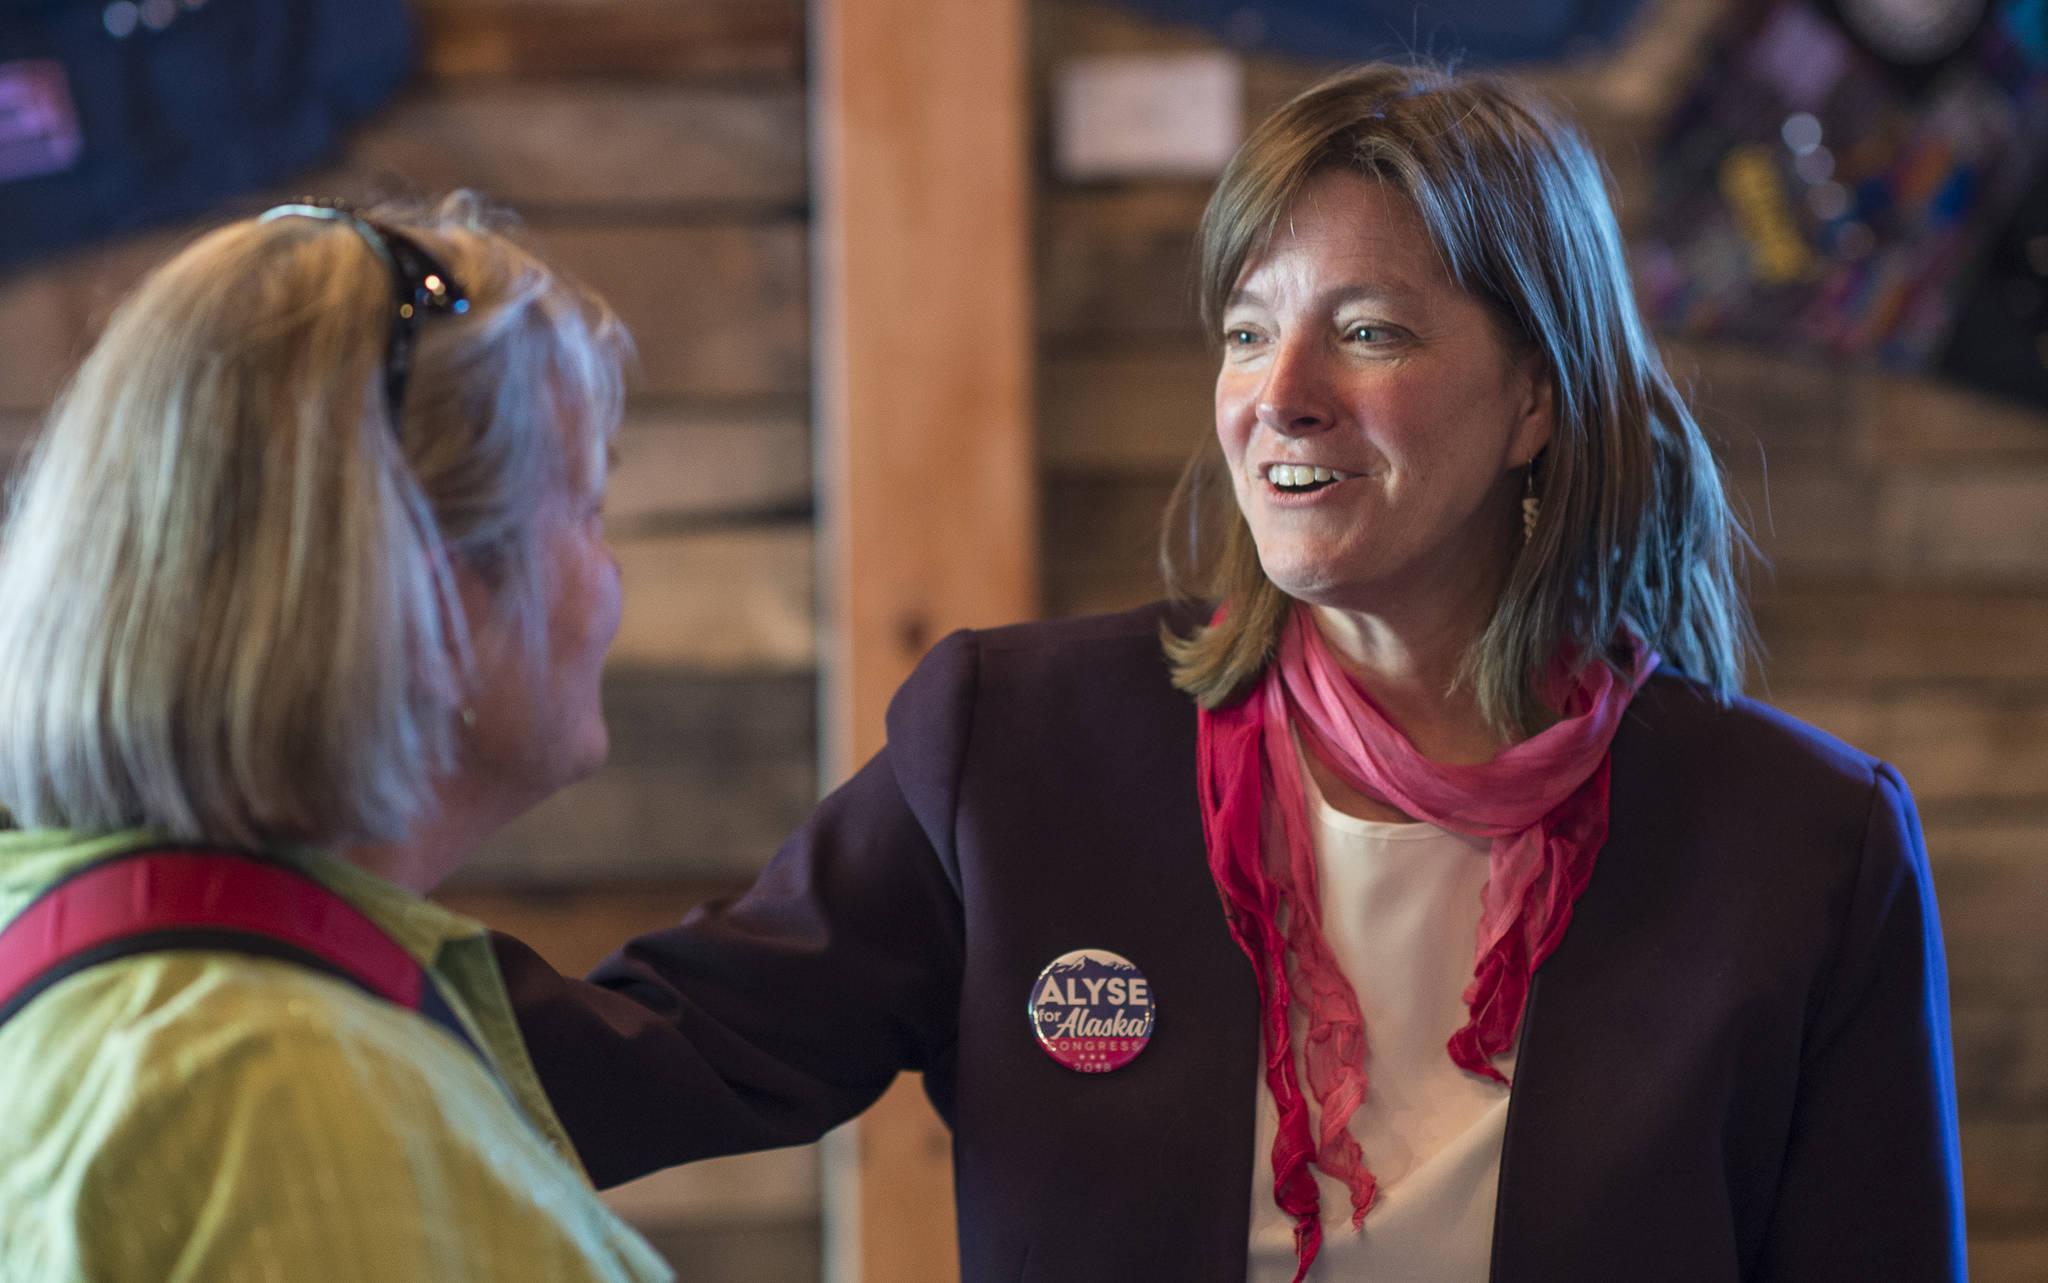 Michael Penn | Juneau Empire                                Alyse Galvin, indpendent candidate for U.S. House of Representatives, right, speaks with Marilyn Orr during a “town-hall-style coffee and conversation” at 60 Degrees North Coffee and Tea on Sept. 14, 2018. Galvin is running against Republican incumbent Rep. Don Young.